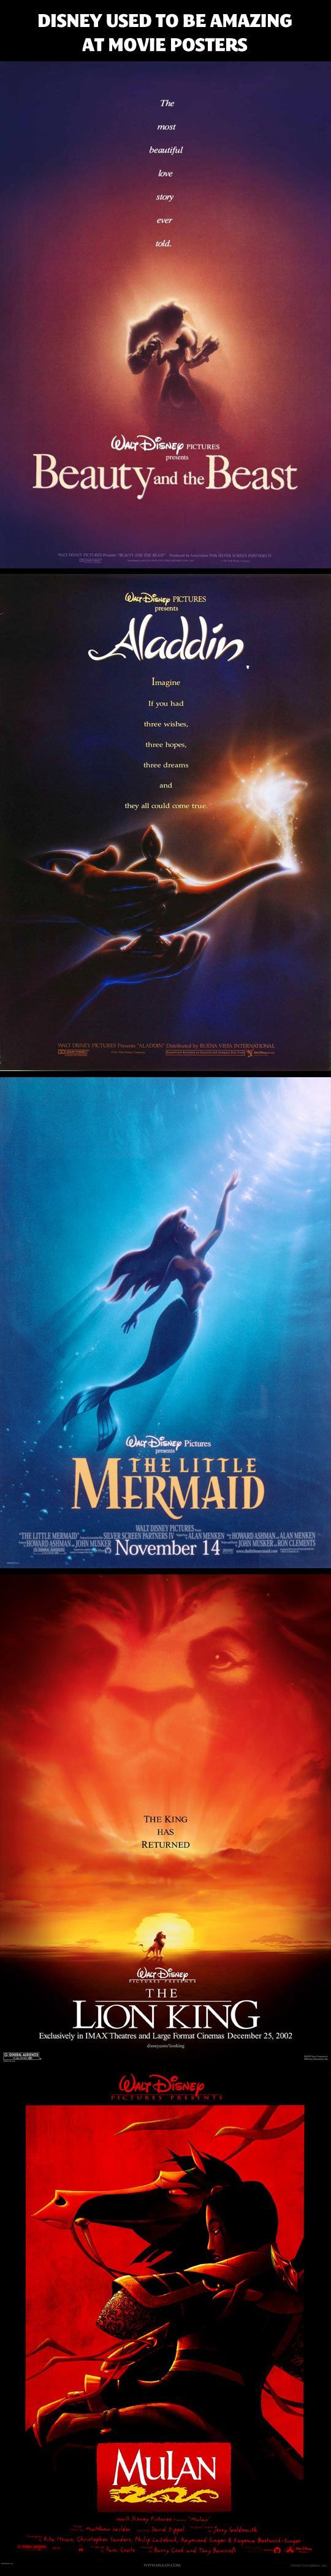 Amazing Disney Movies Posters. I want the old disney poster back…. I miss them!